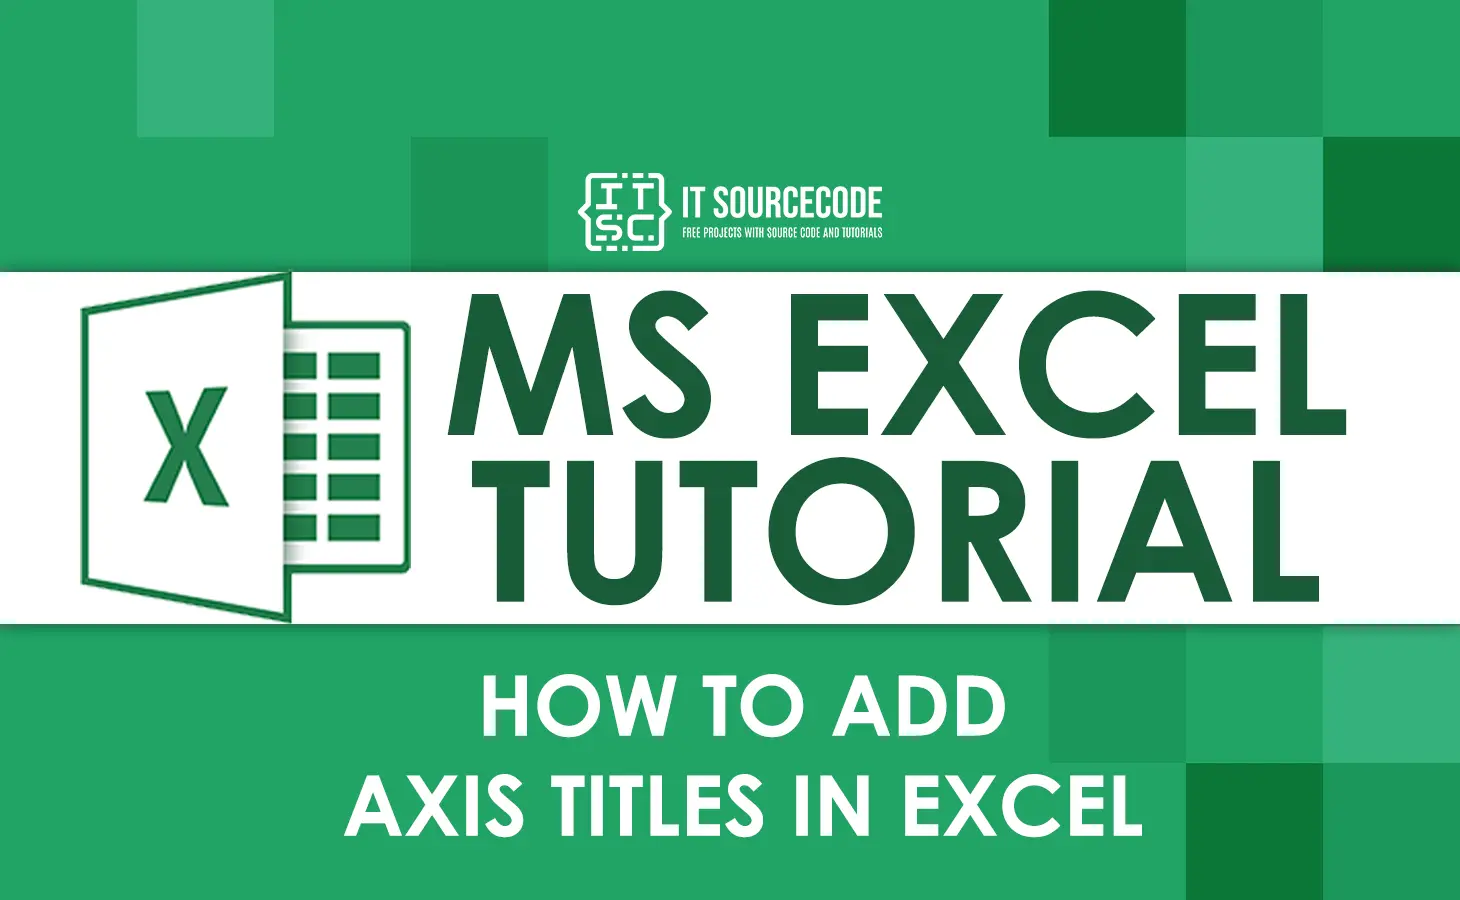 How To Add Axis Titles In Excel